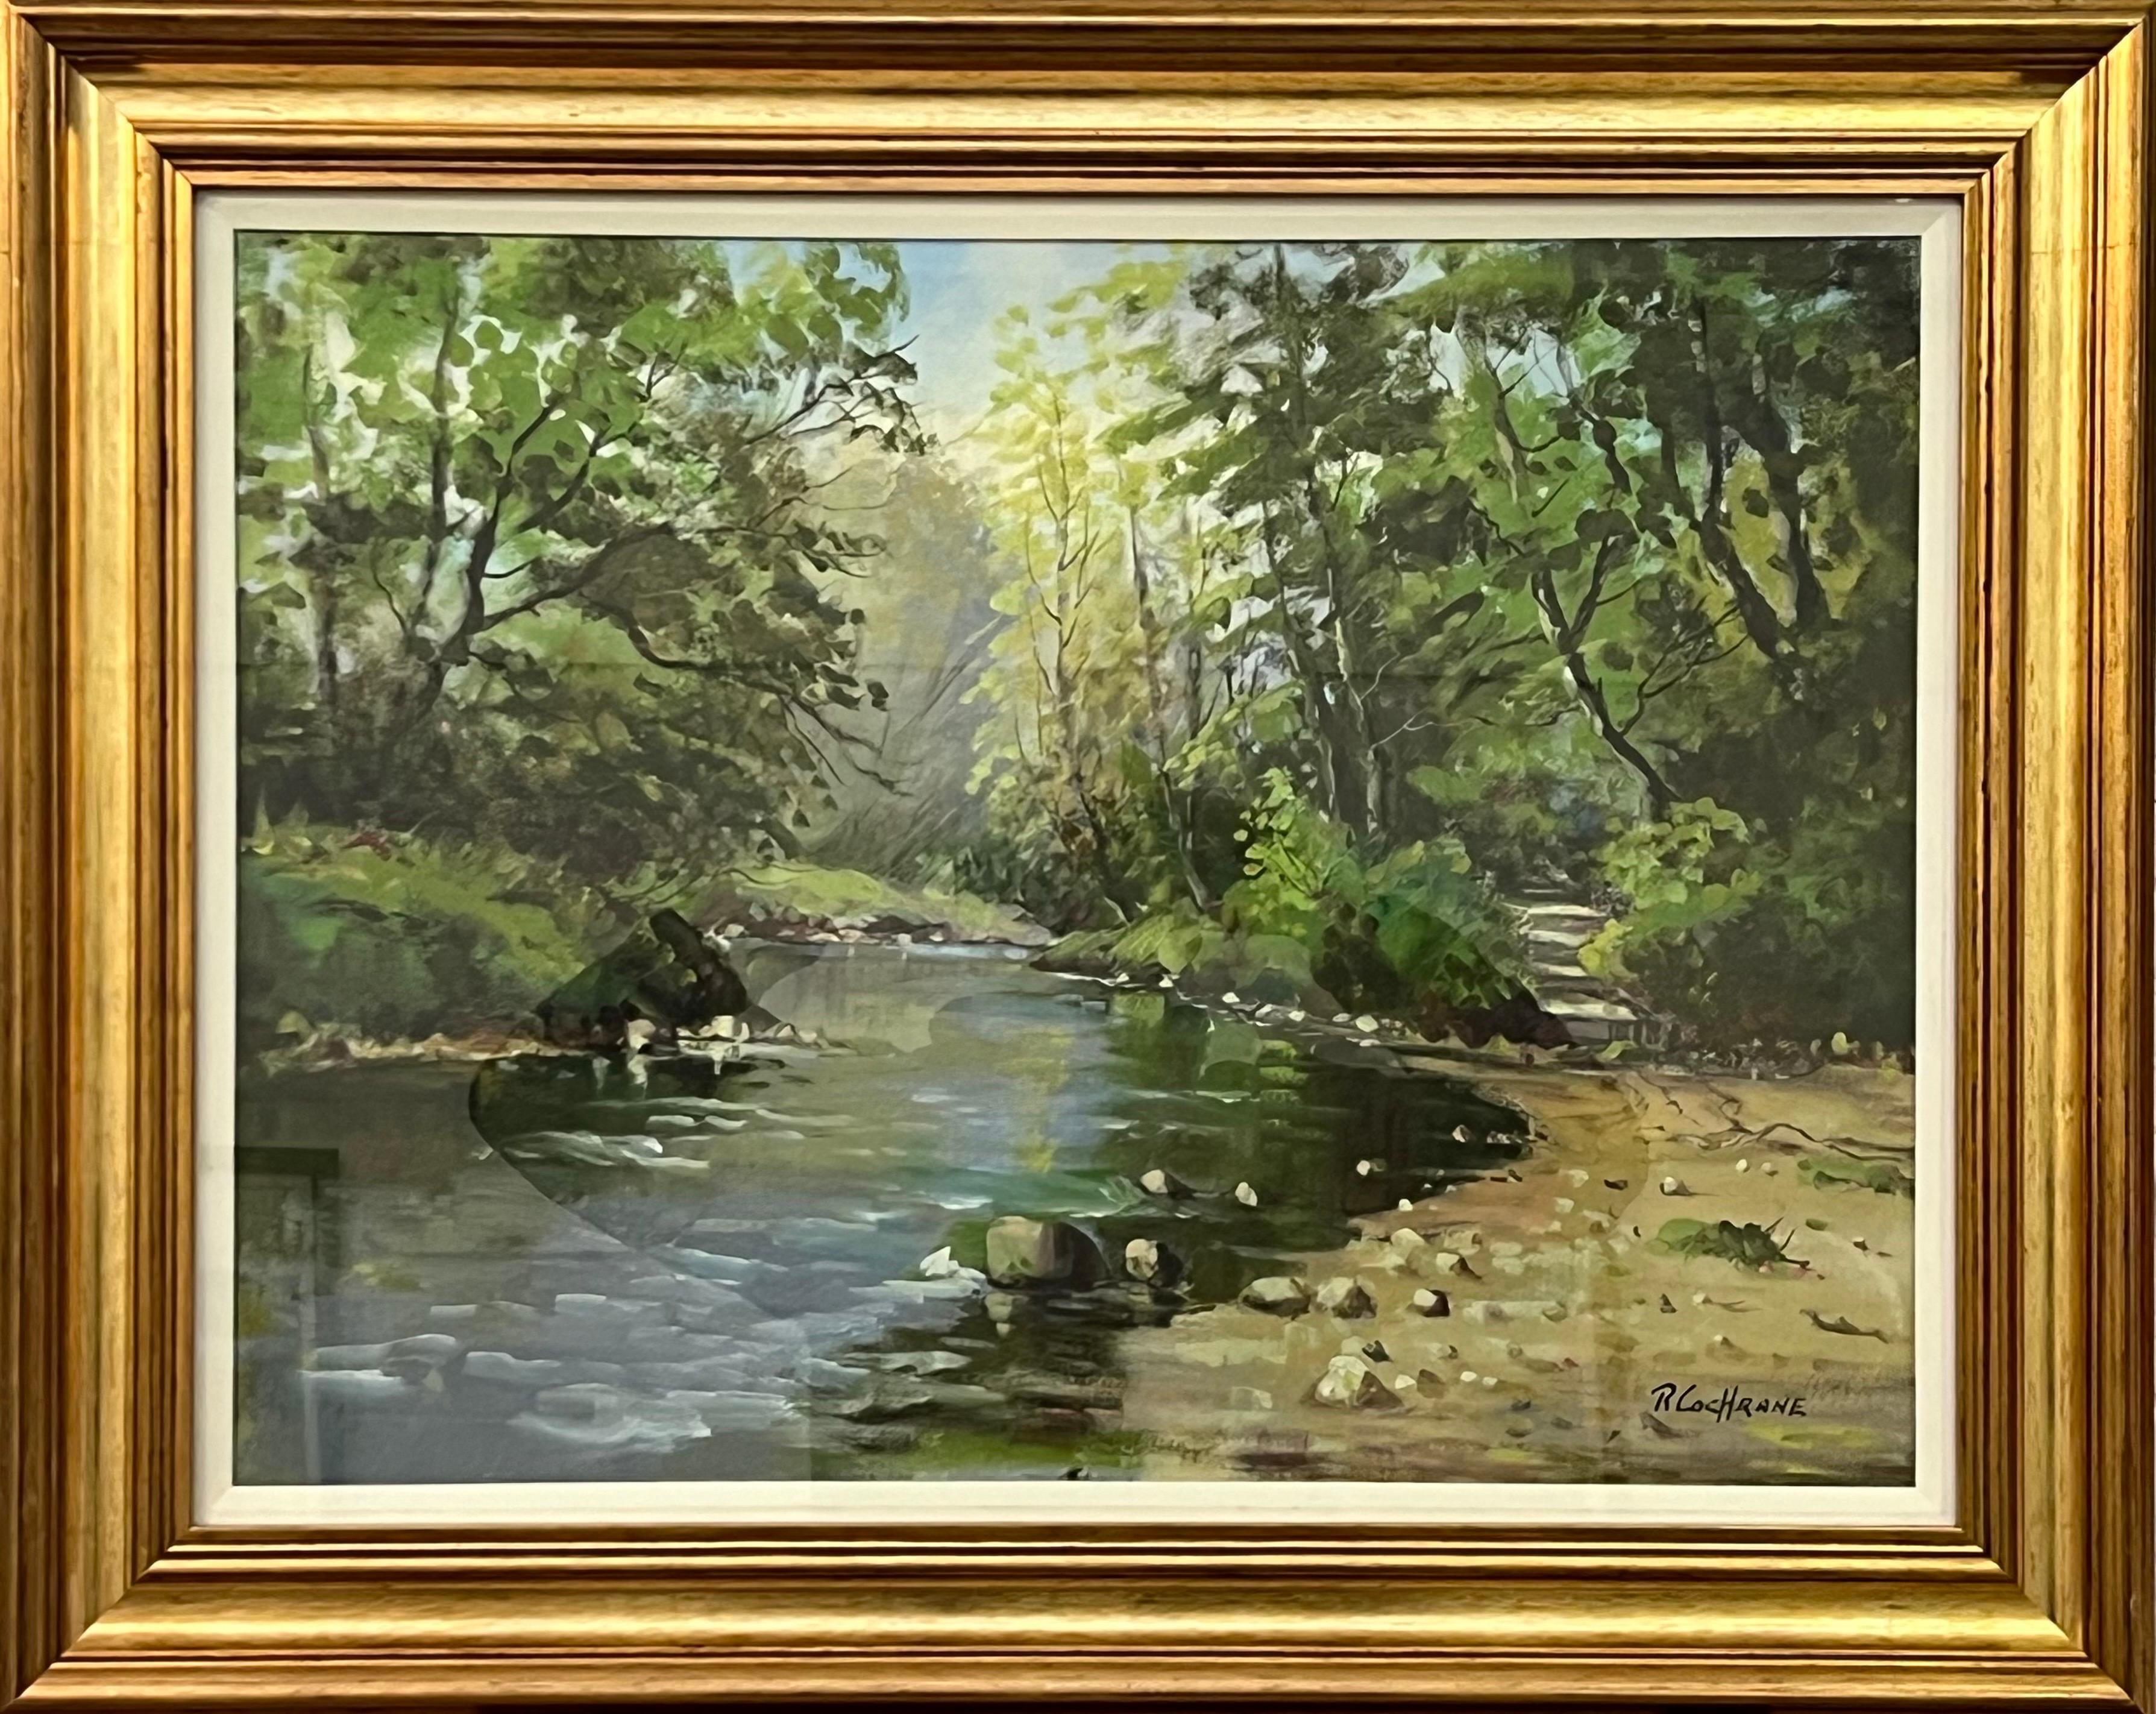 Vintage Post-Impressionist Painting of Tree-Lined River in the Irish Countryside